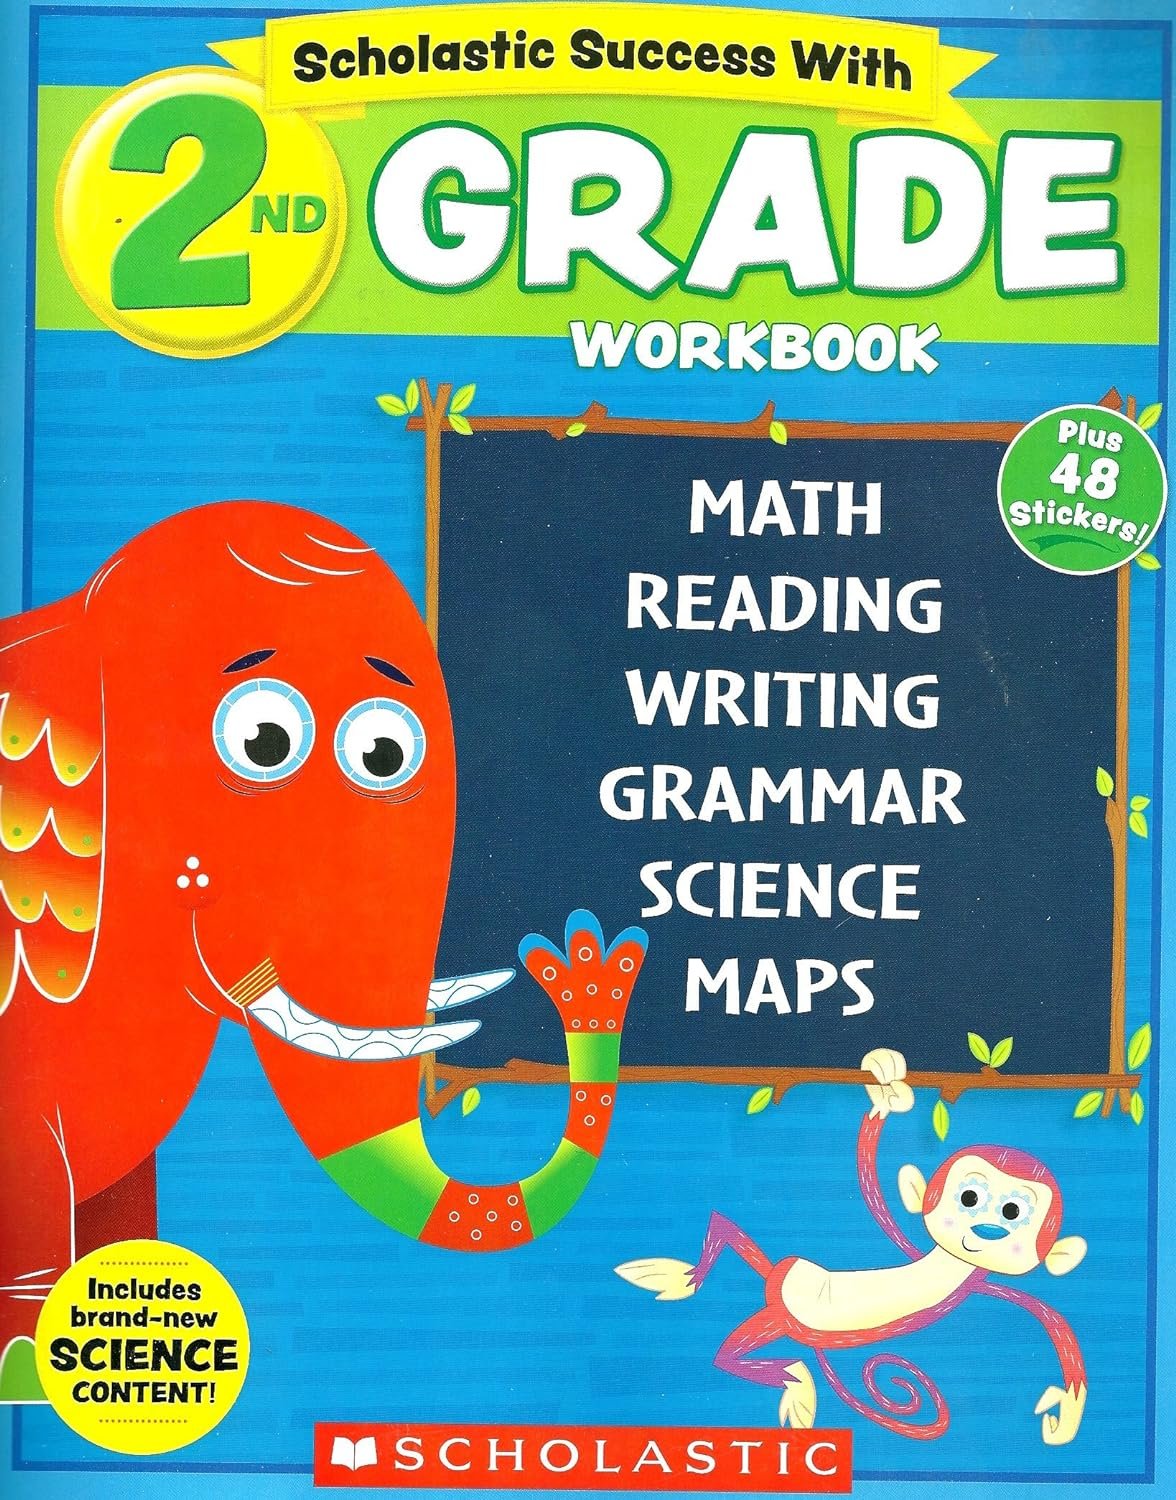 NEW 2018 Edition Scholastic - 2nd Grade Workbook with Motivational Stickers